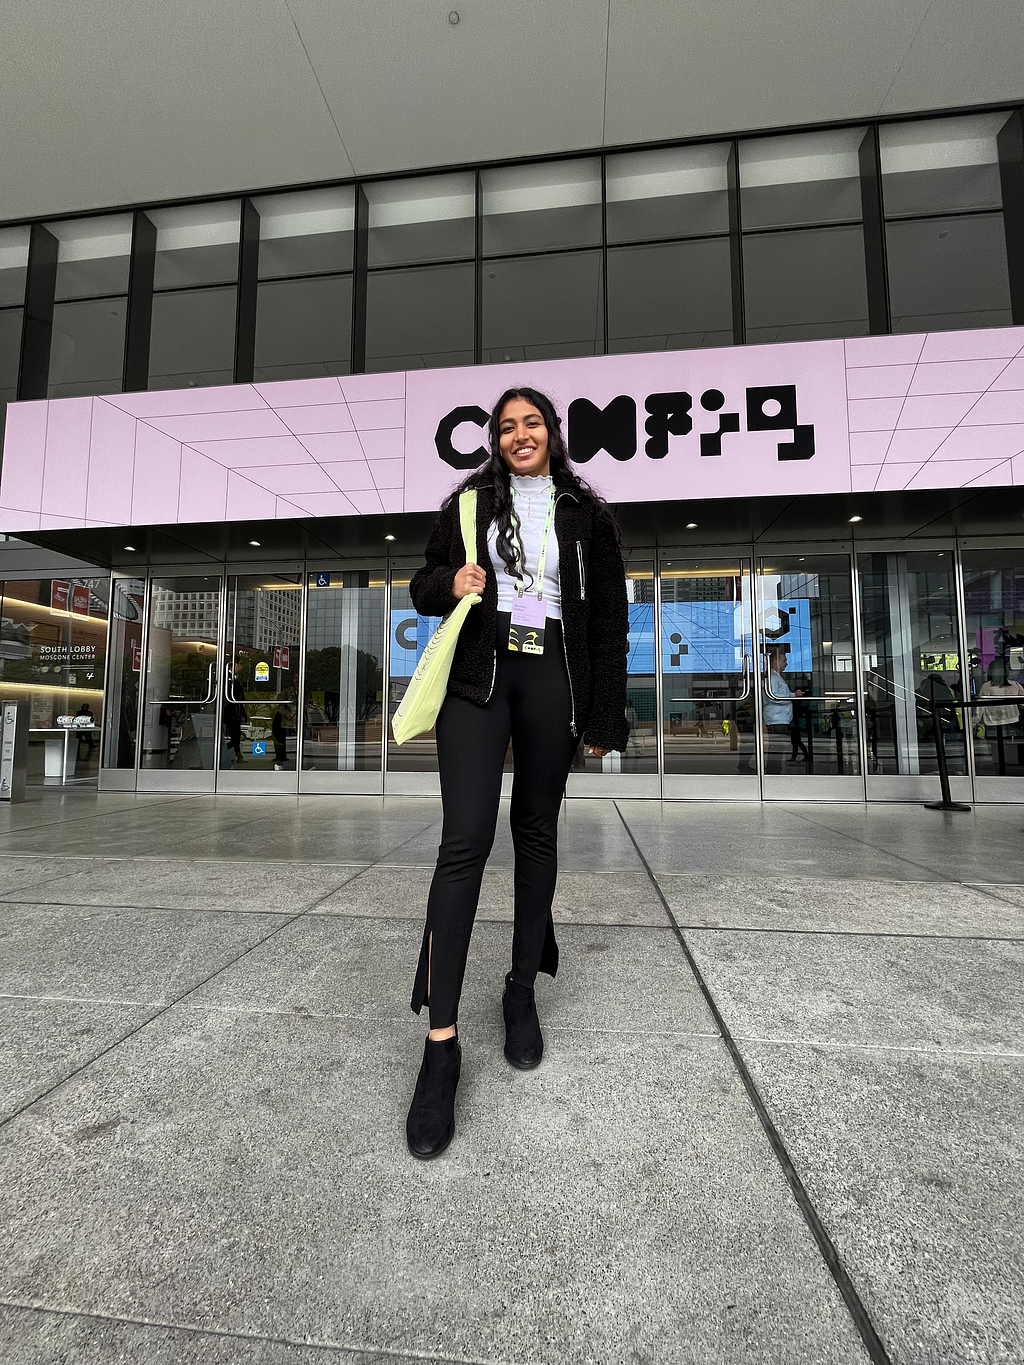 The author Anvitha stands in front of the Config banner at the Moscone center, sporting the fluorescent tote bag and name tag from Figma